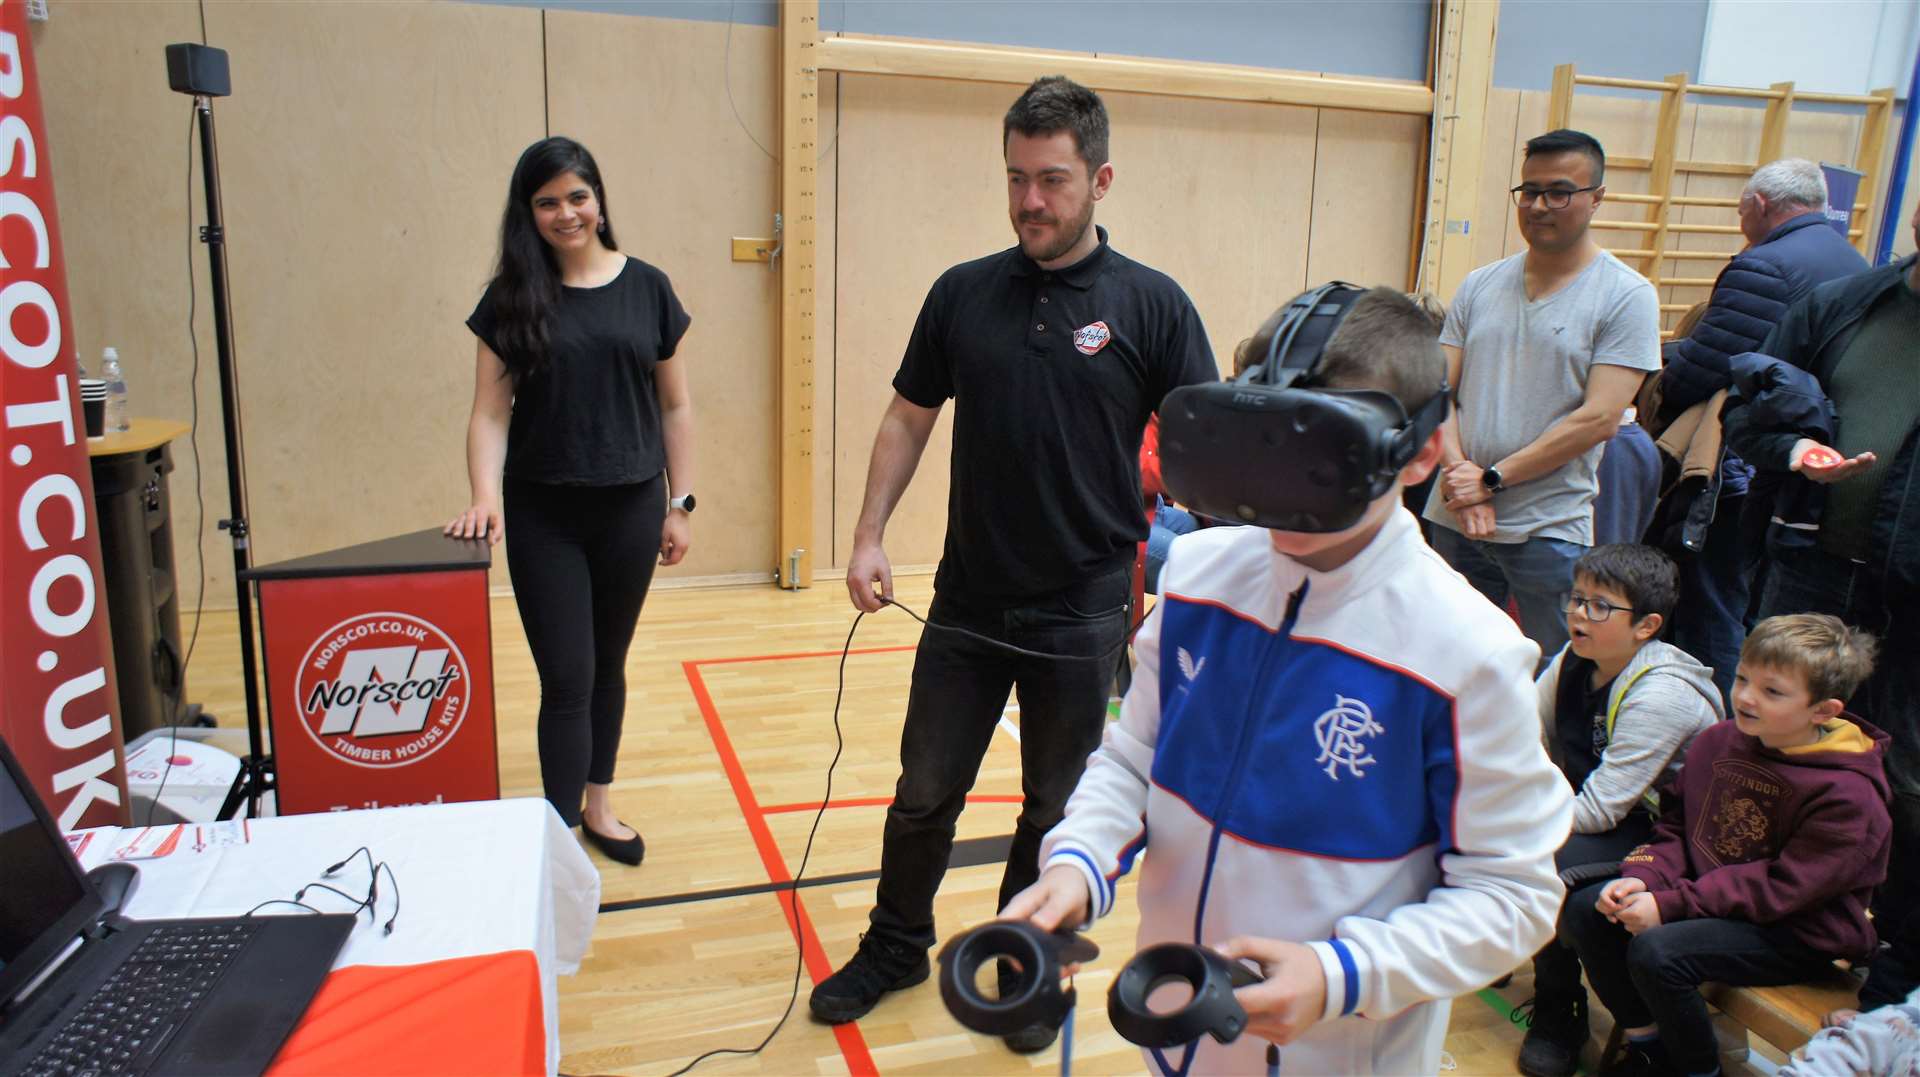 Caithness company Norscot had a popular display with a VR headset for kids to try out. Picture: DGS